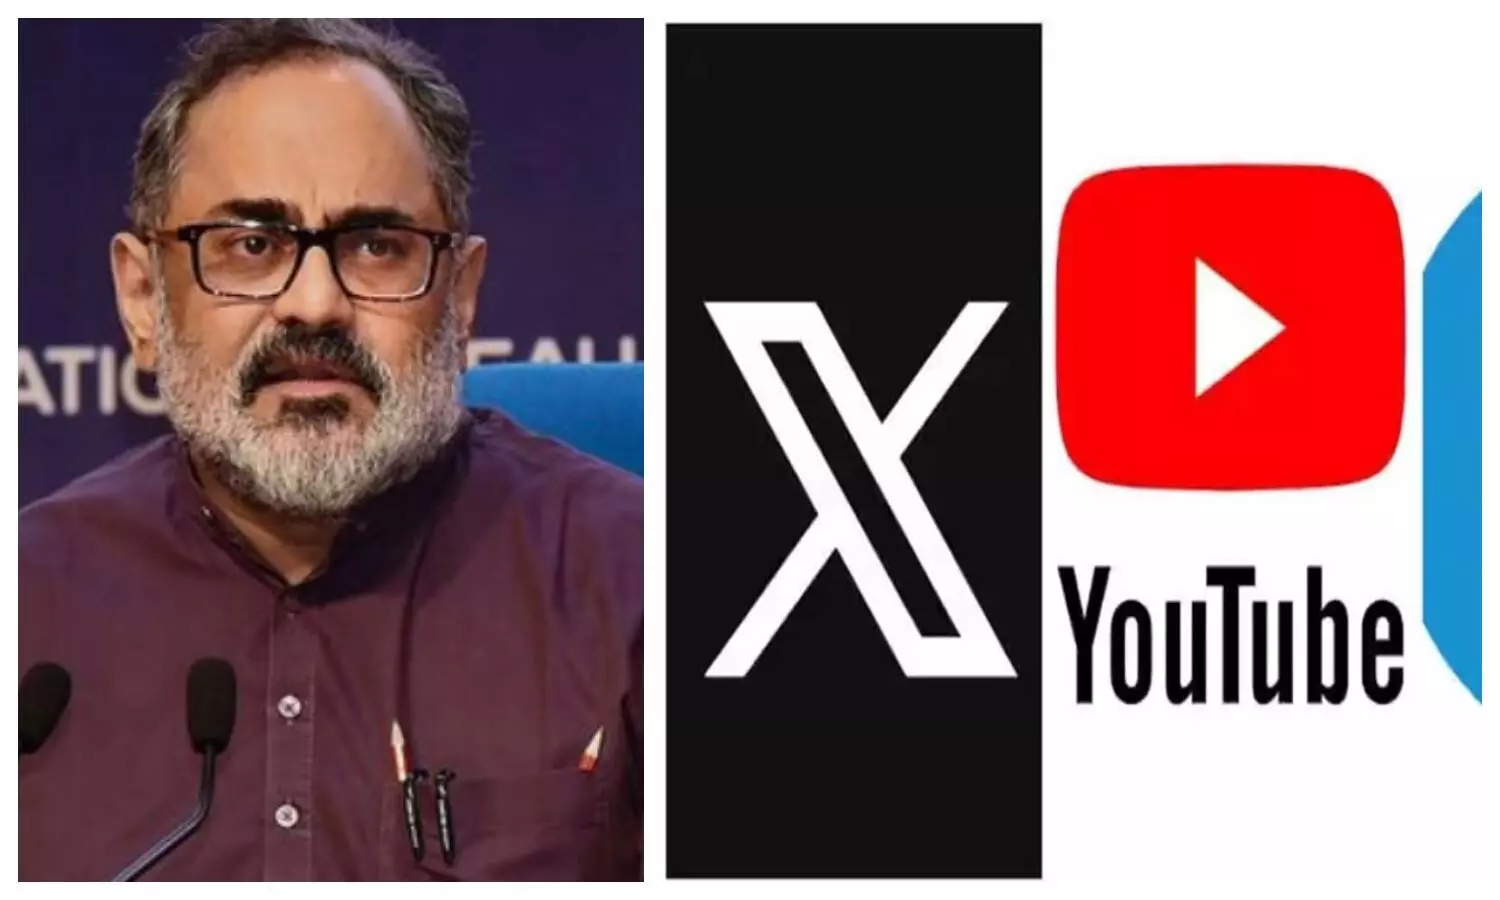 Govt Issues Notices to X-YouTube-Telegram